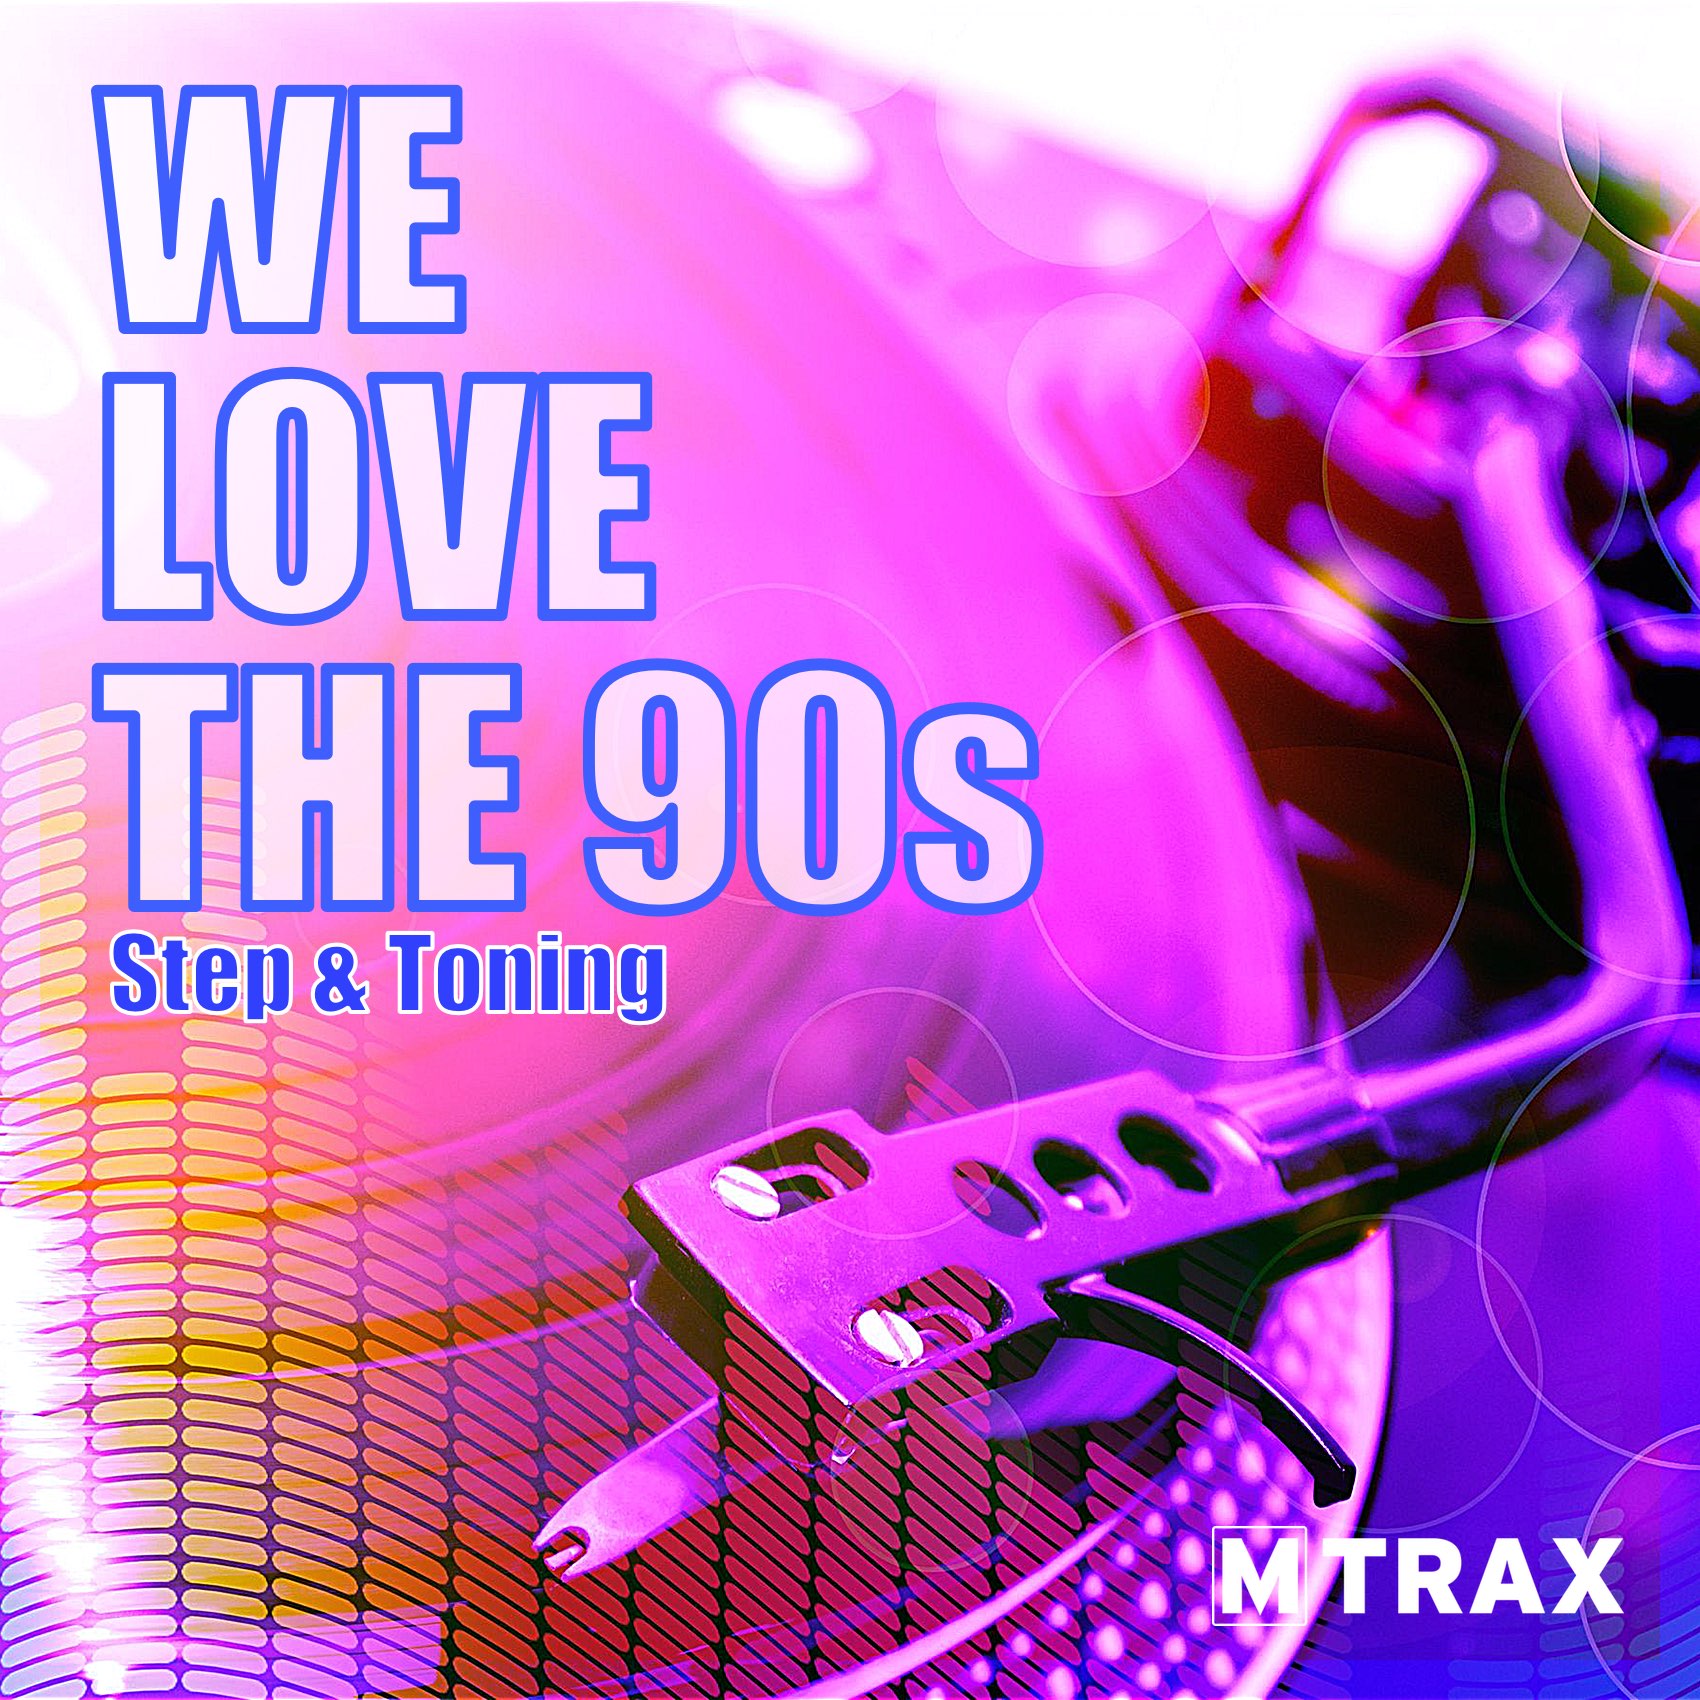 We Love The 90s - Step & Toning | MTrax Fitness Music